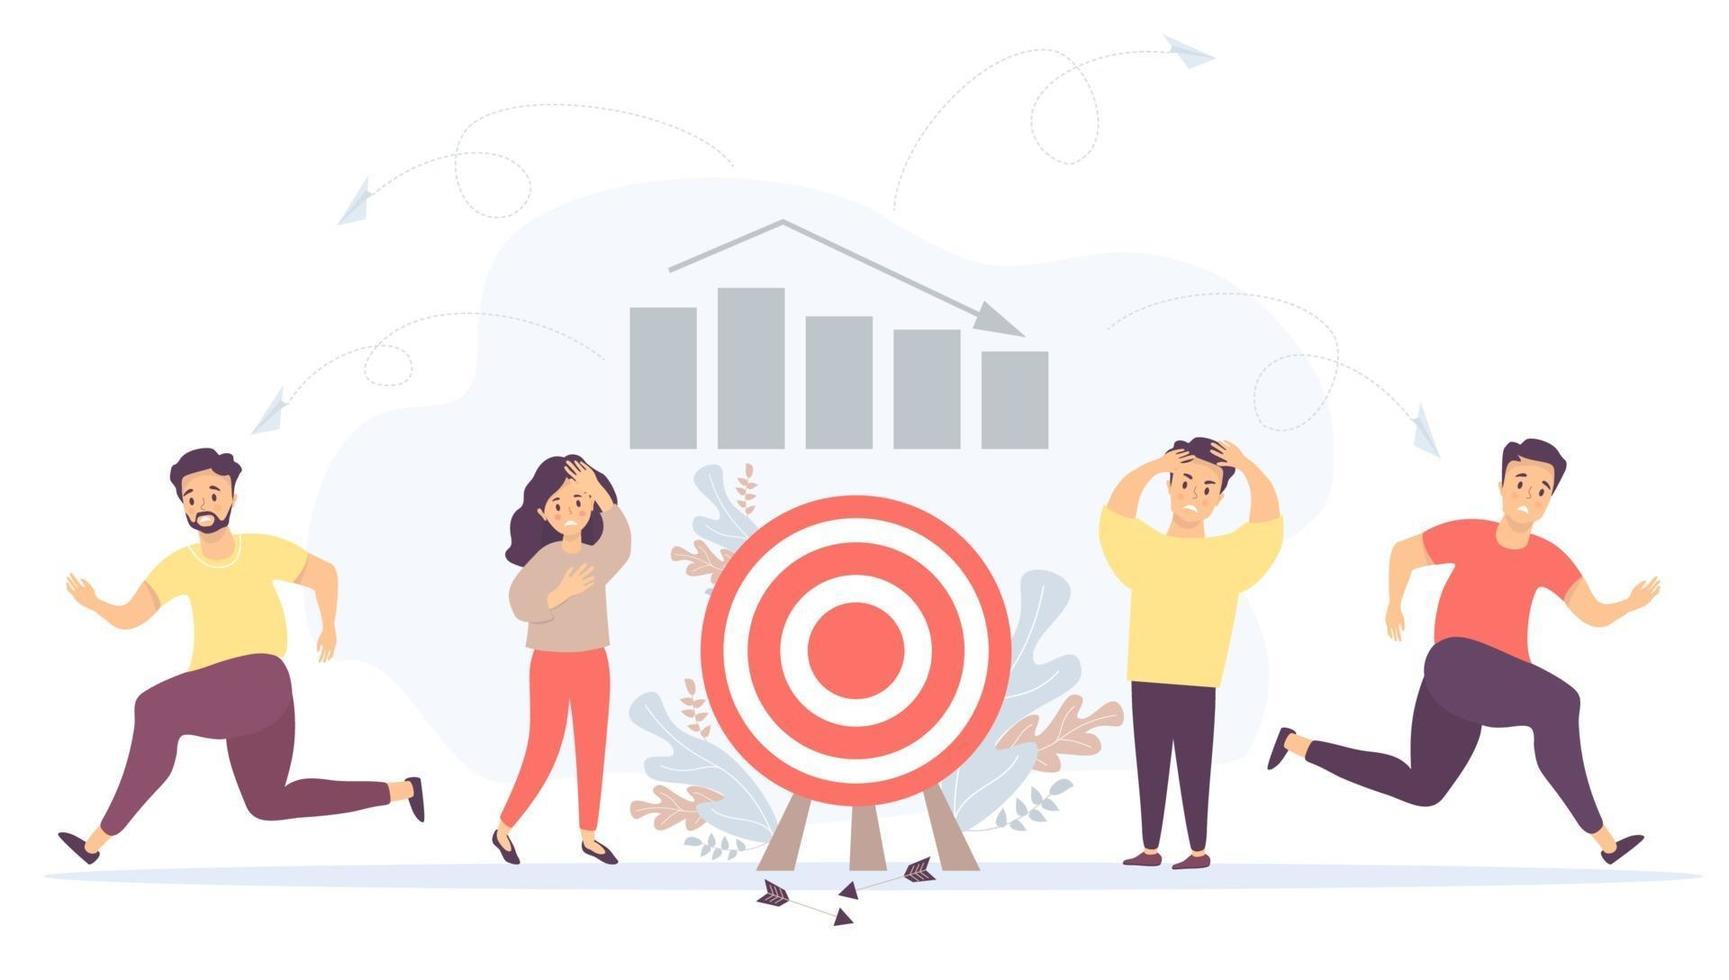 Vector. Business concept - crisis, failure, collapse of relationships and teamwork. A man and a woman near the target with falling arrows. People run away. Against the background of graphs and columns vector